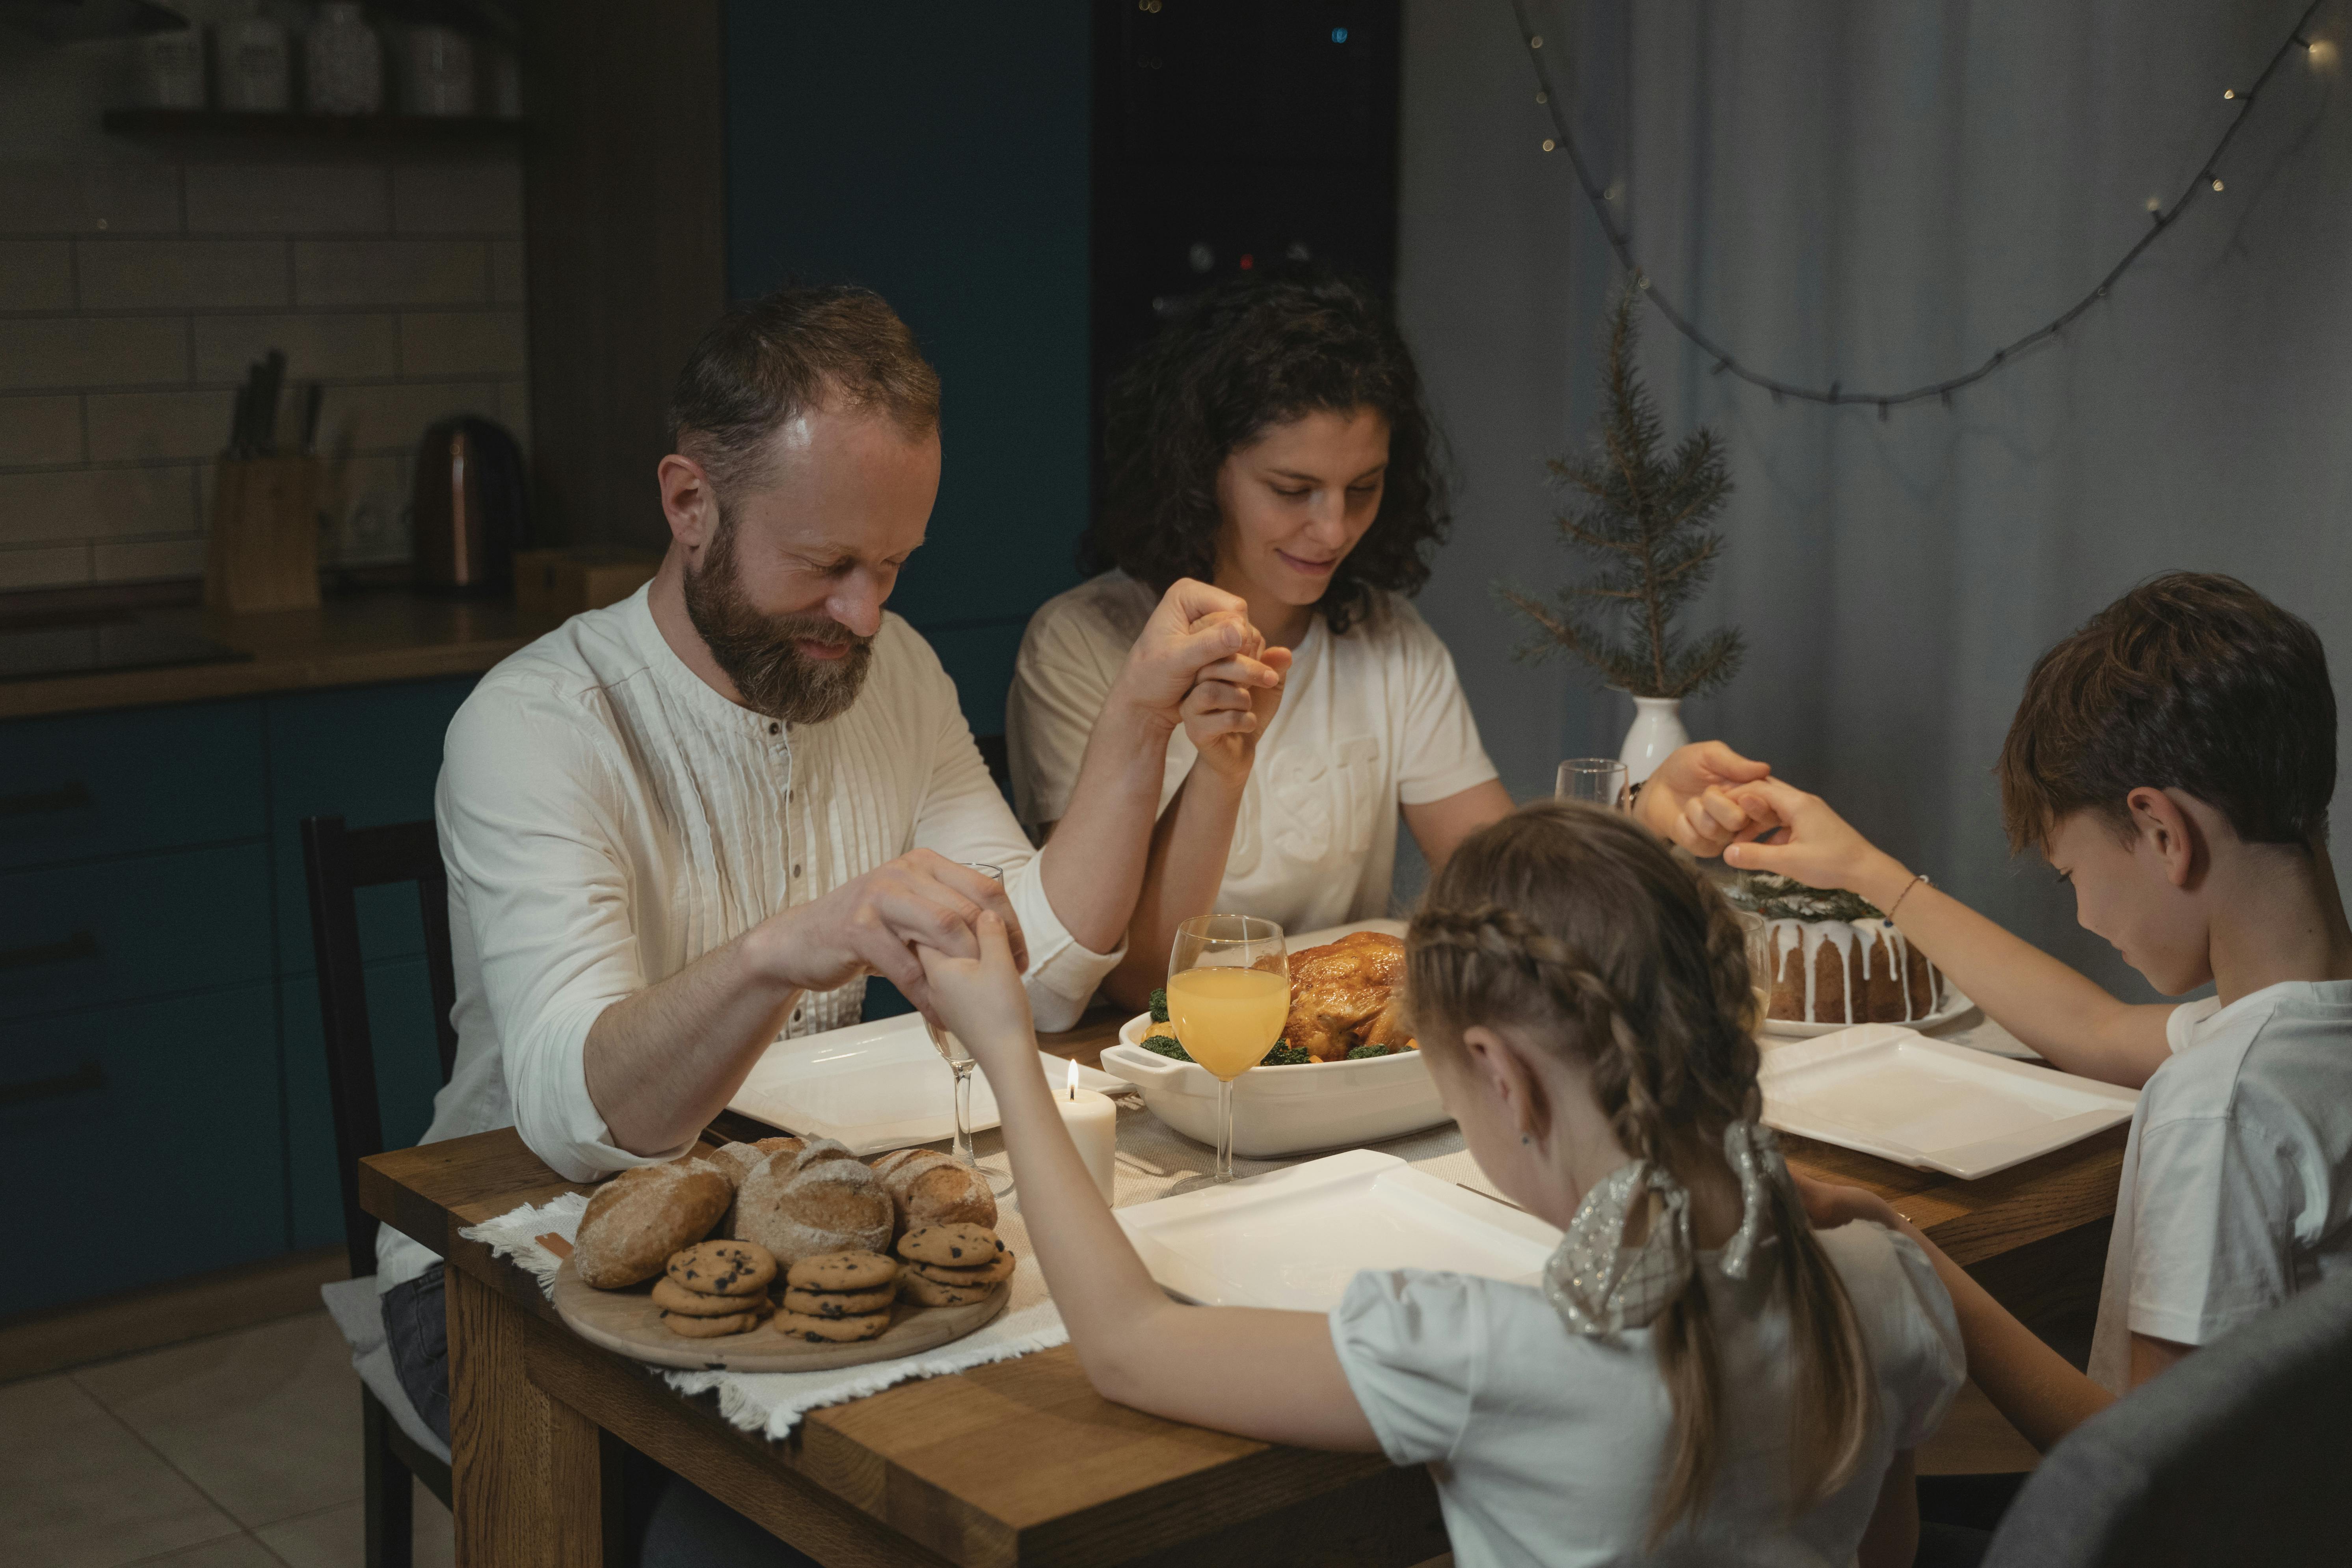 Parents holding their children's hands while praying before eating | Source: Pexels